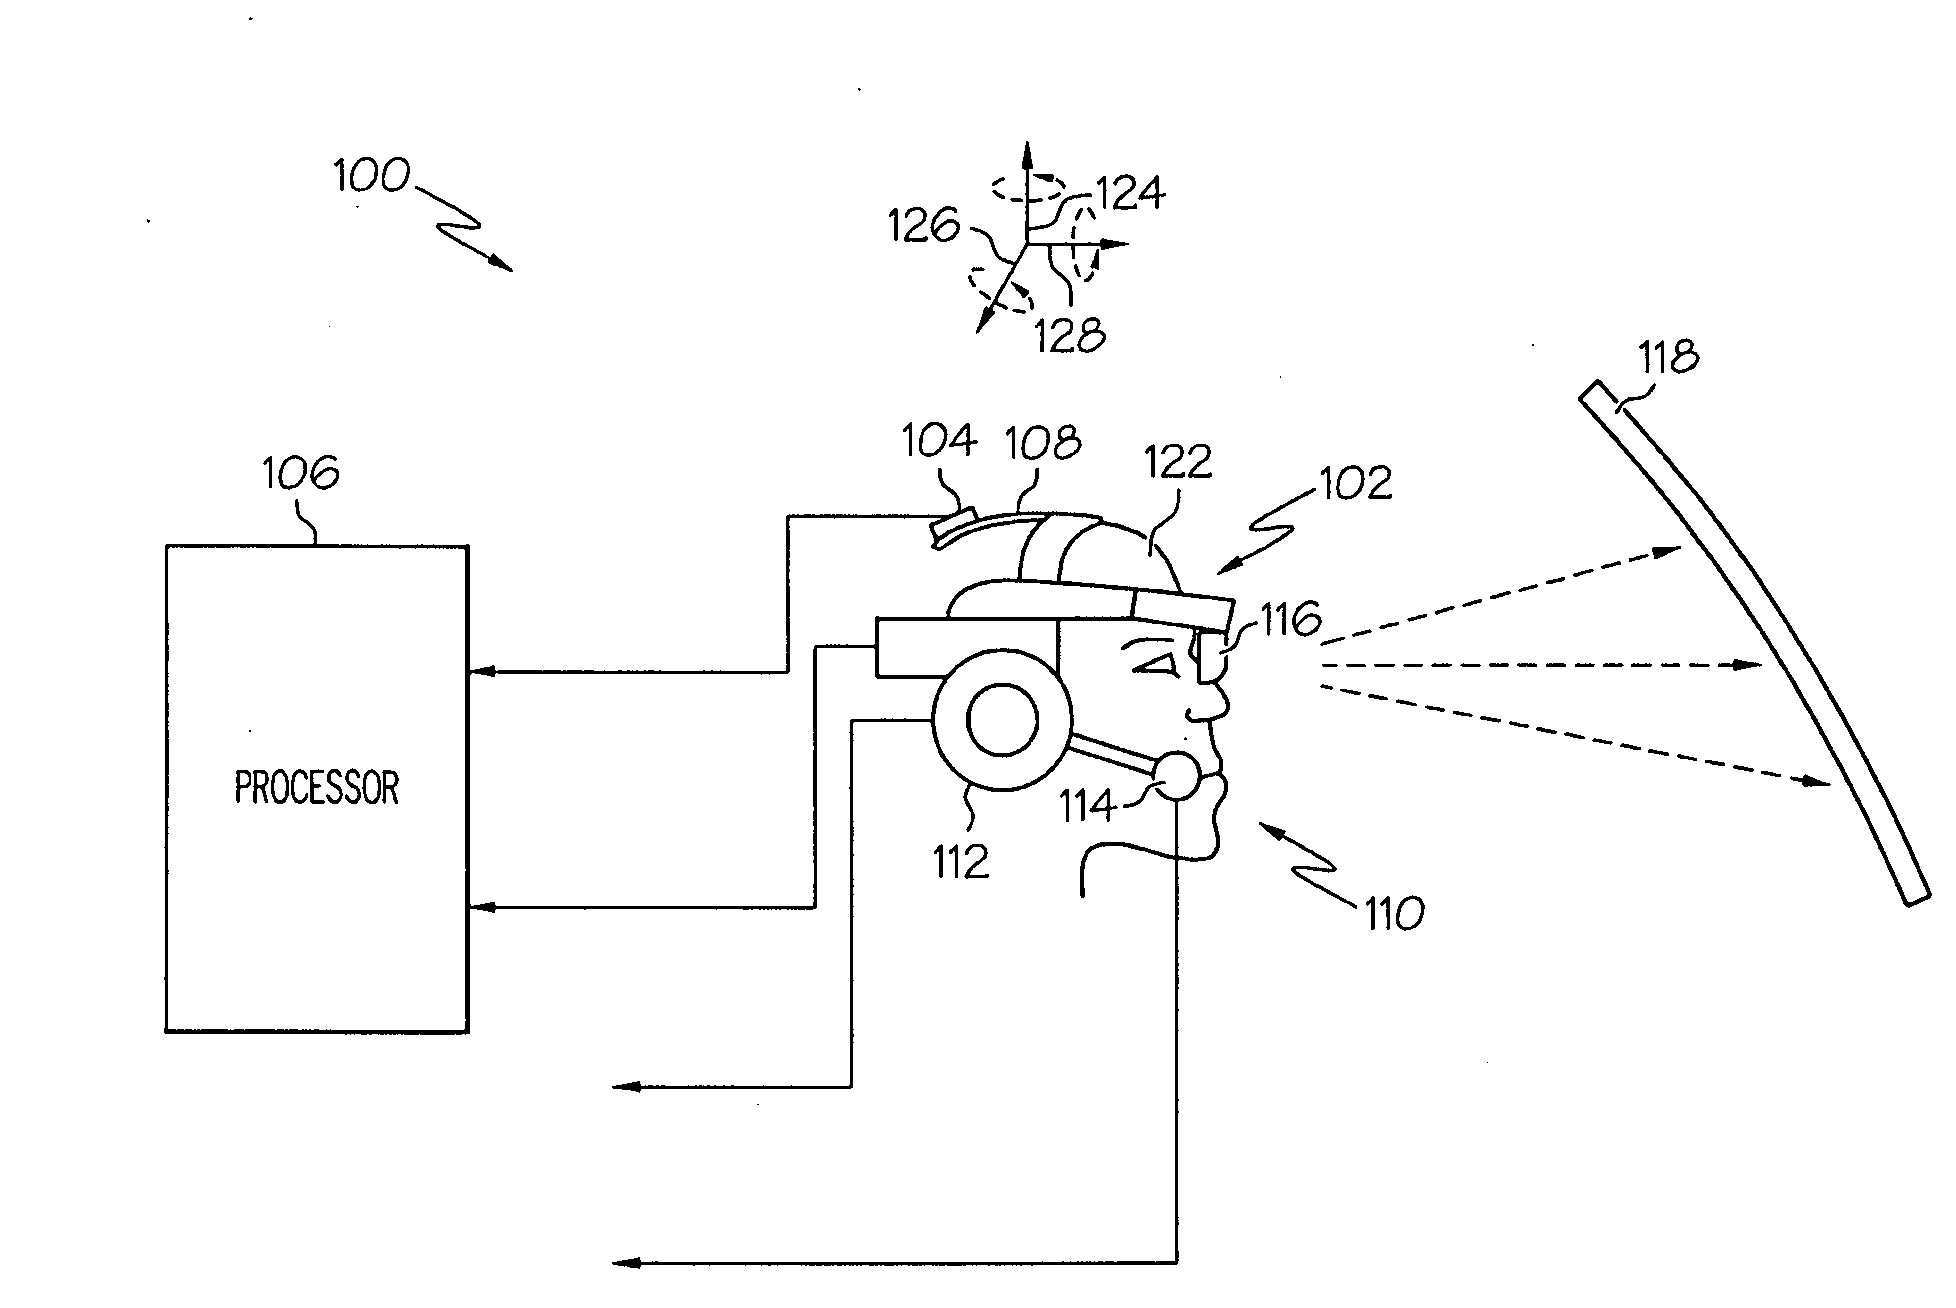 Near-to-eye display artifact reduction system and method